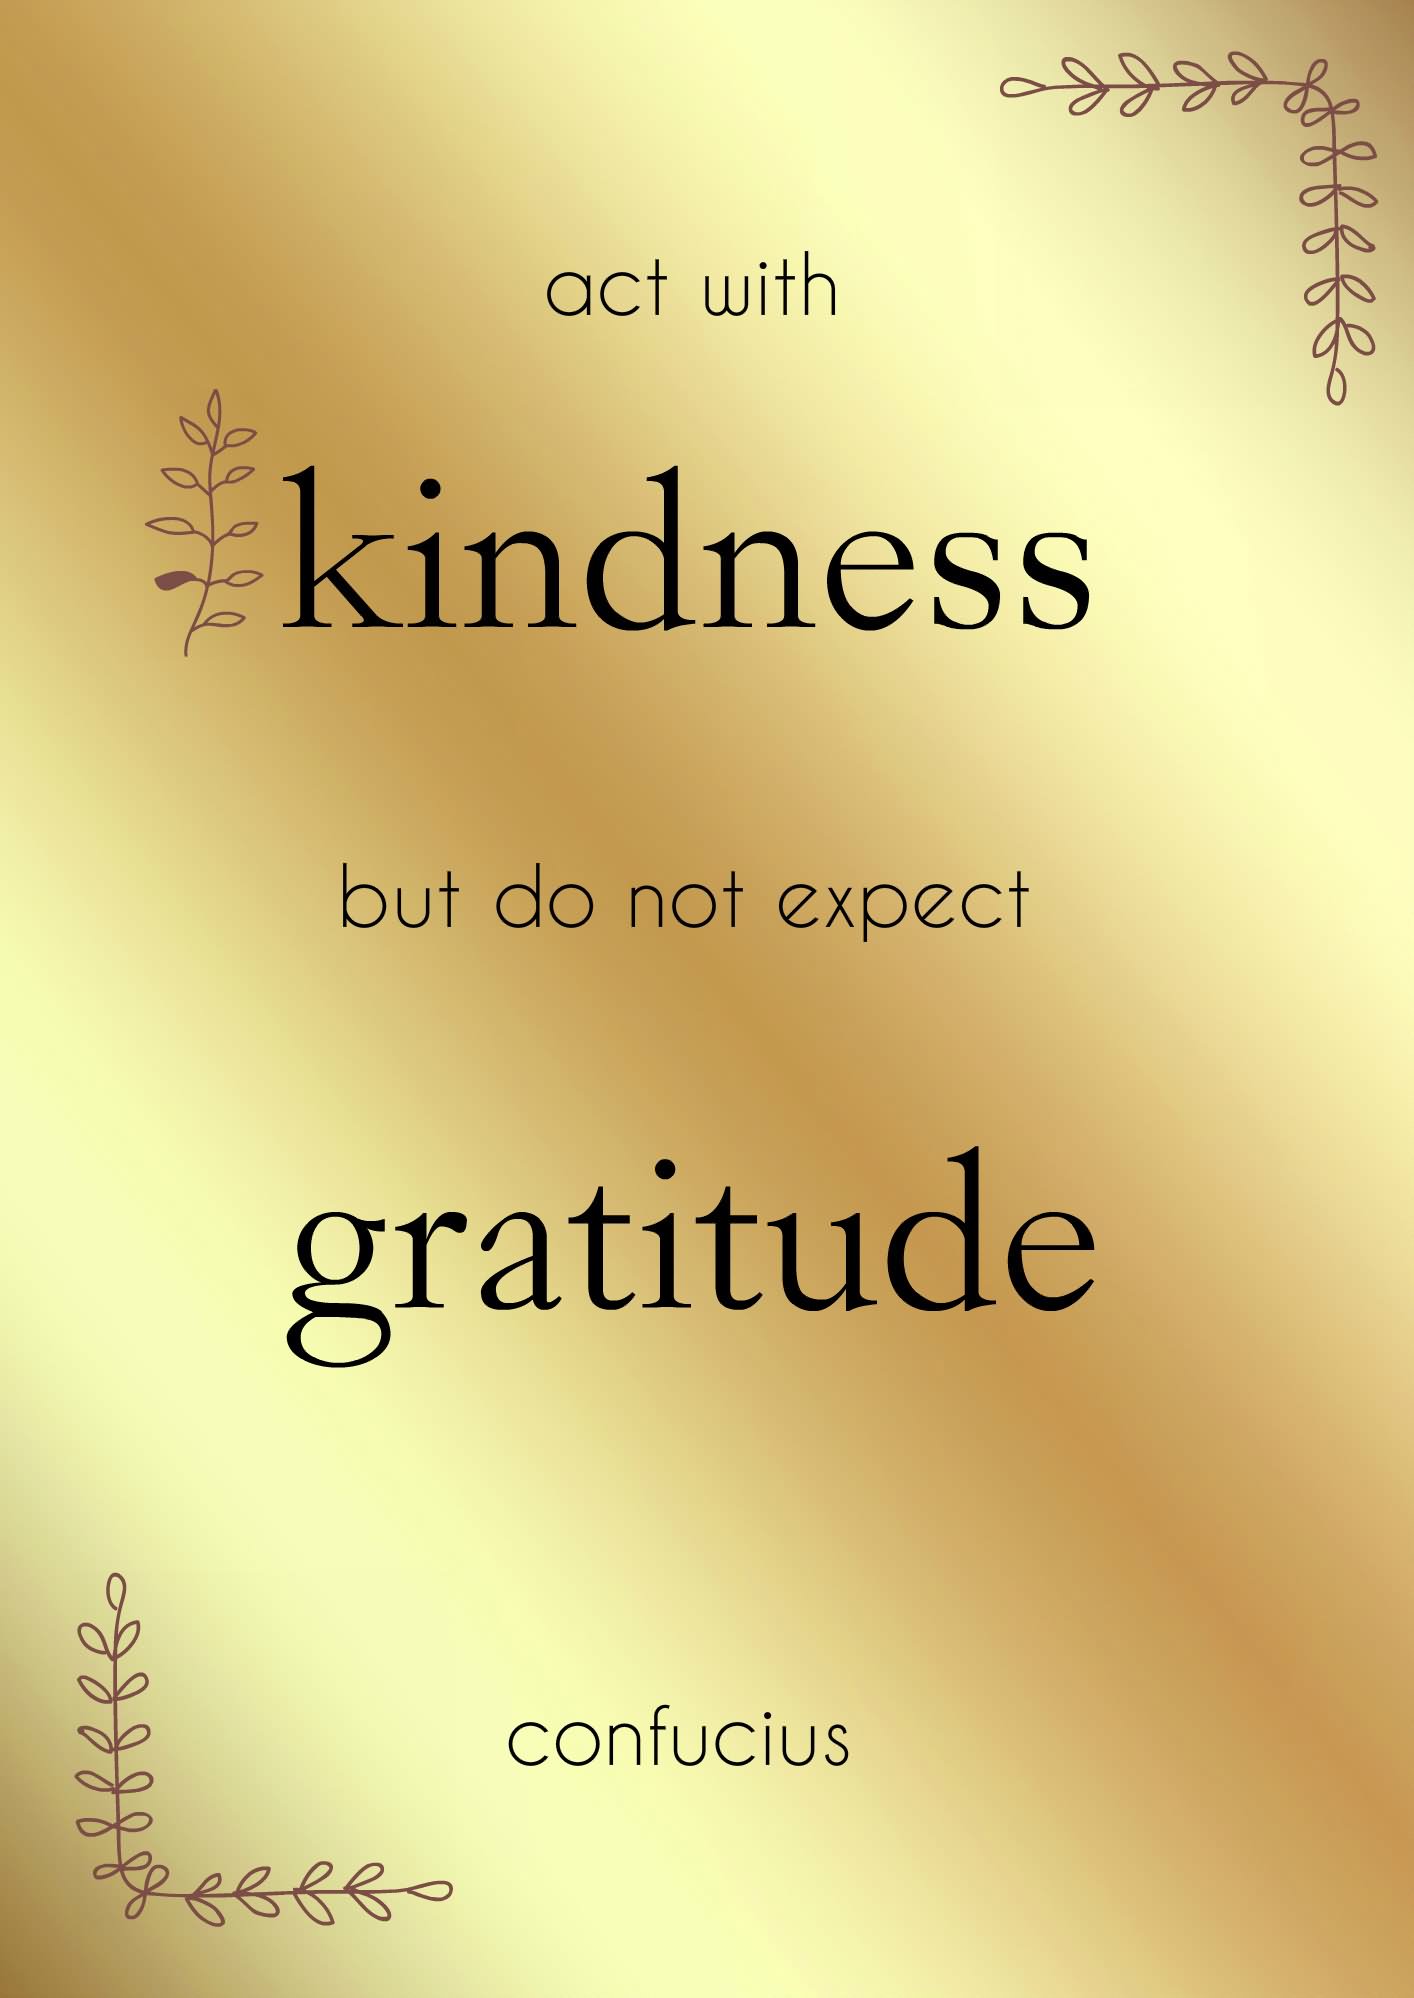 Act with kindness, but do not expect gratitude.